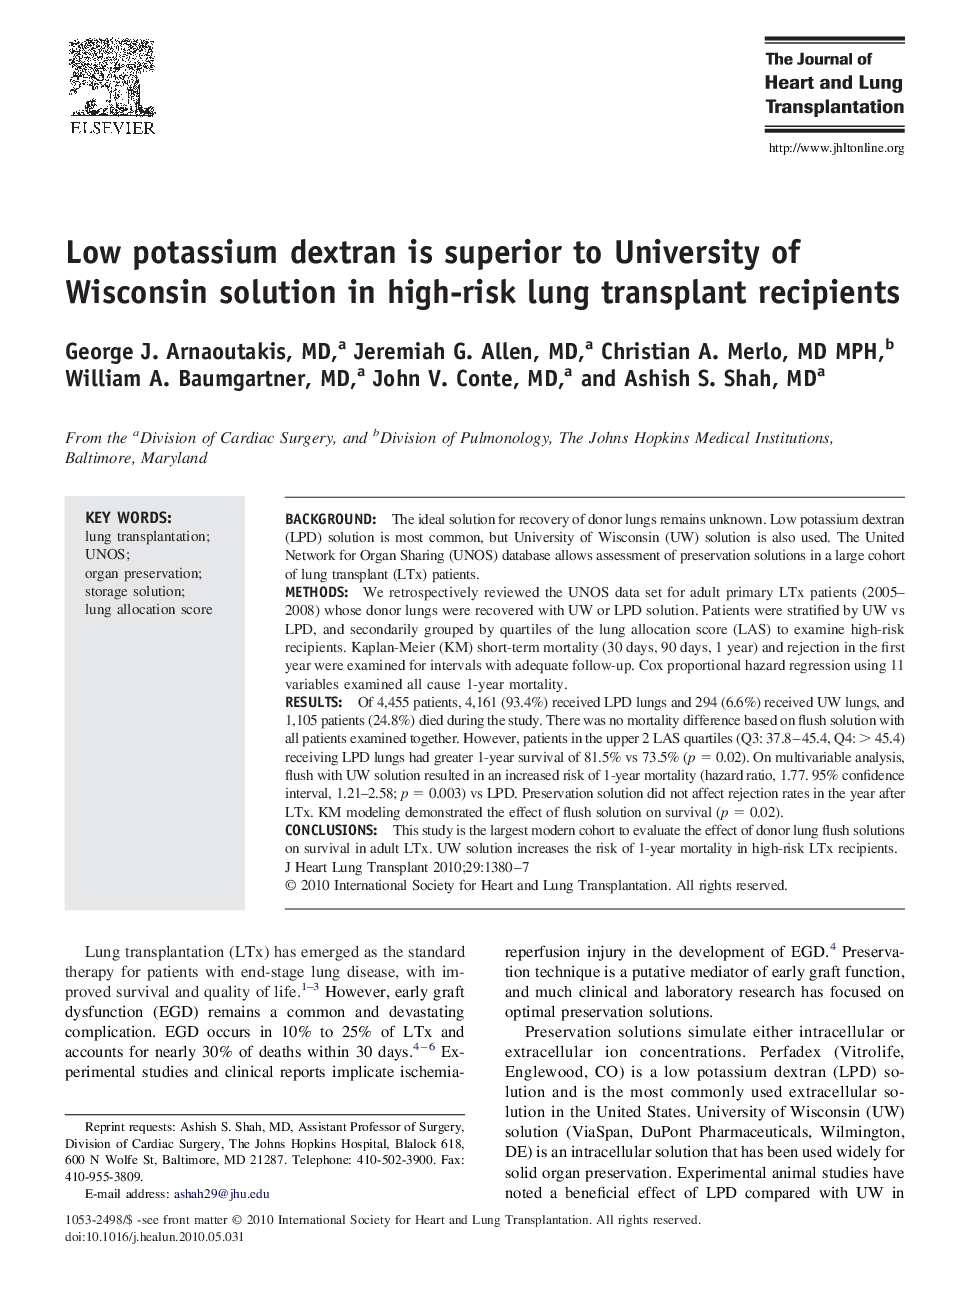 Low potassium dextran is superior to University of Wisconsin solution in high-risk lung transplant recipients